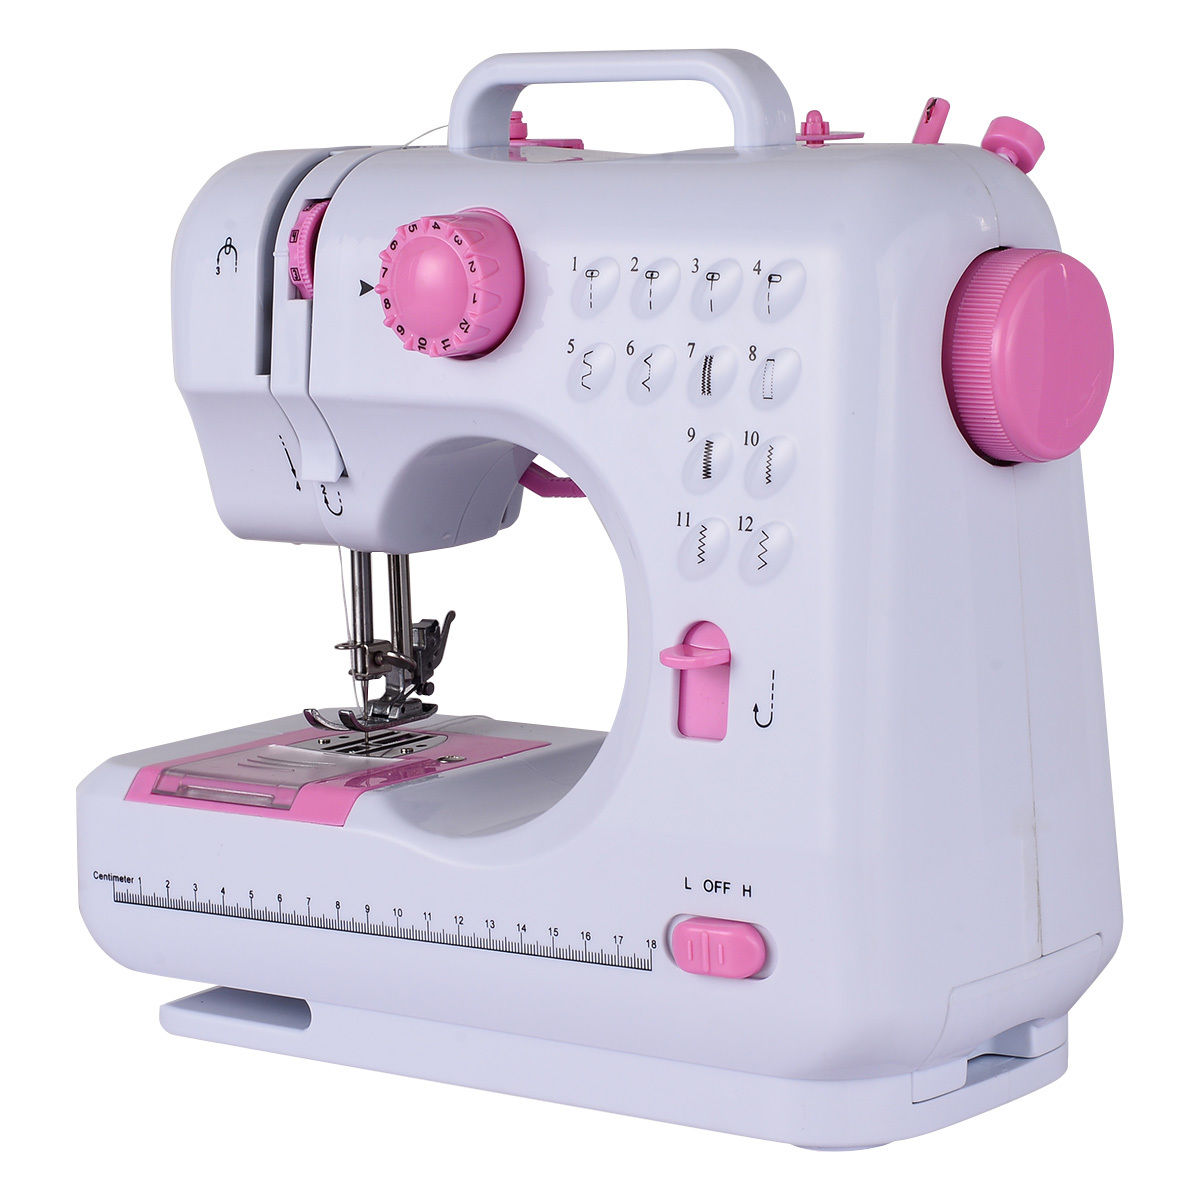 Costway Sewing Machine Free-Arm Crafting Mending Machine with 12 Built-In Stitched White - image 3 of 10